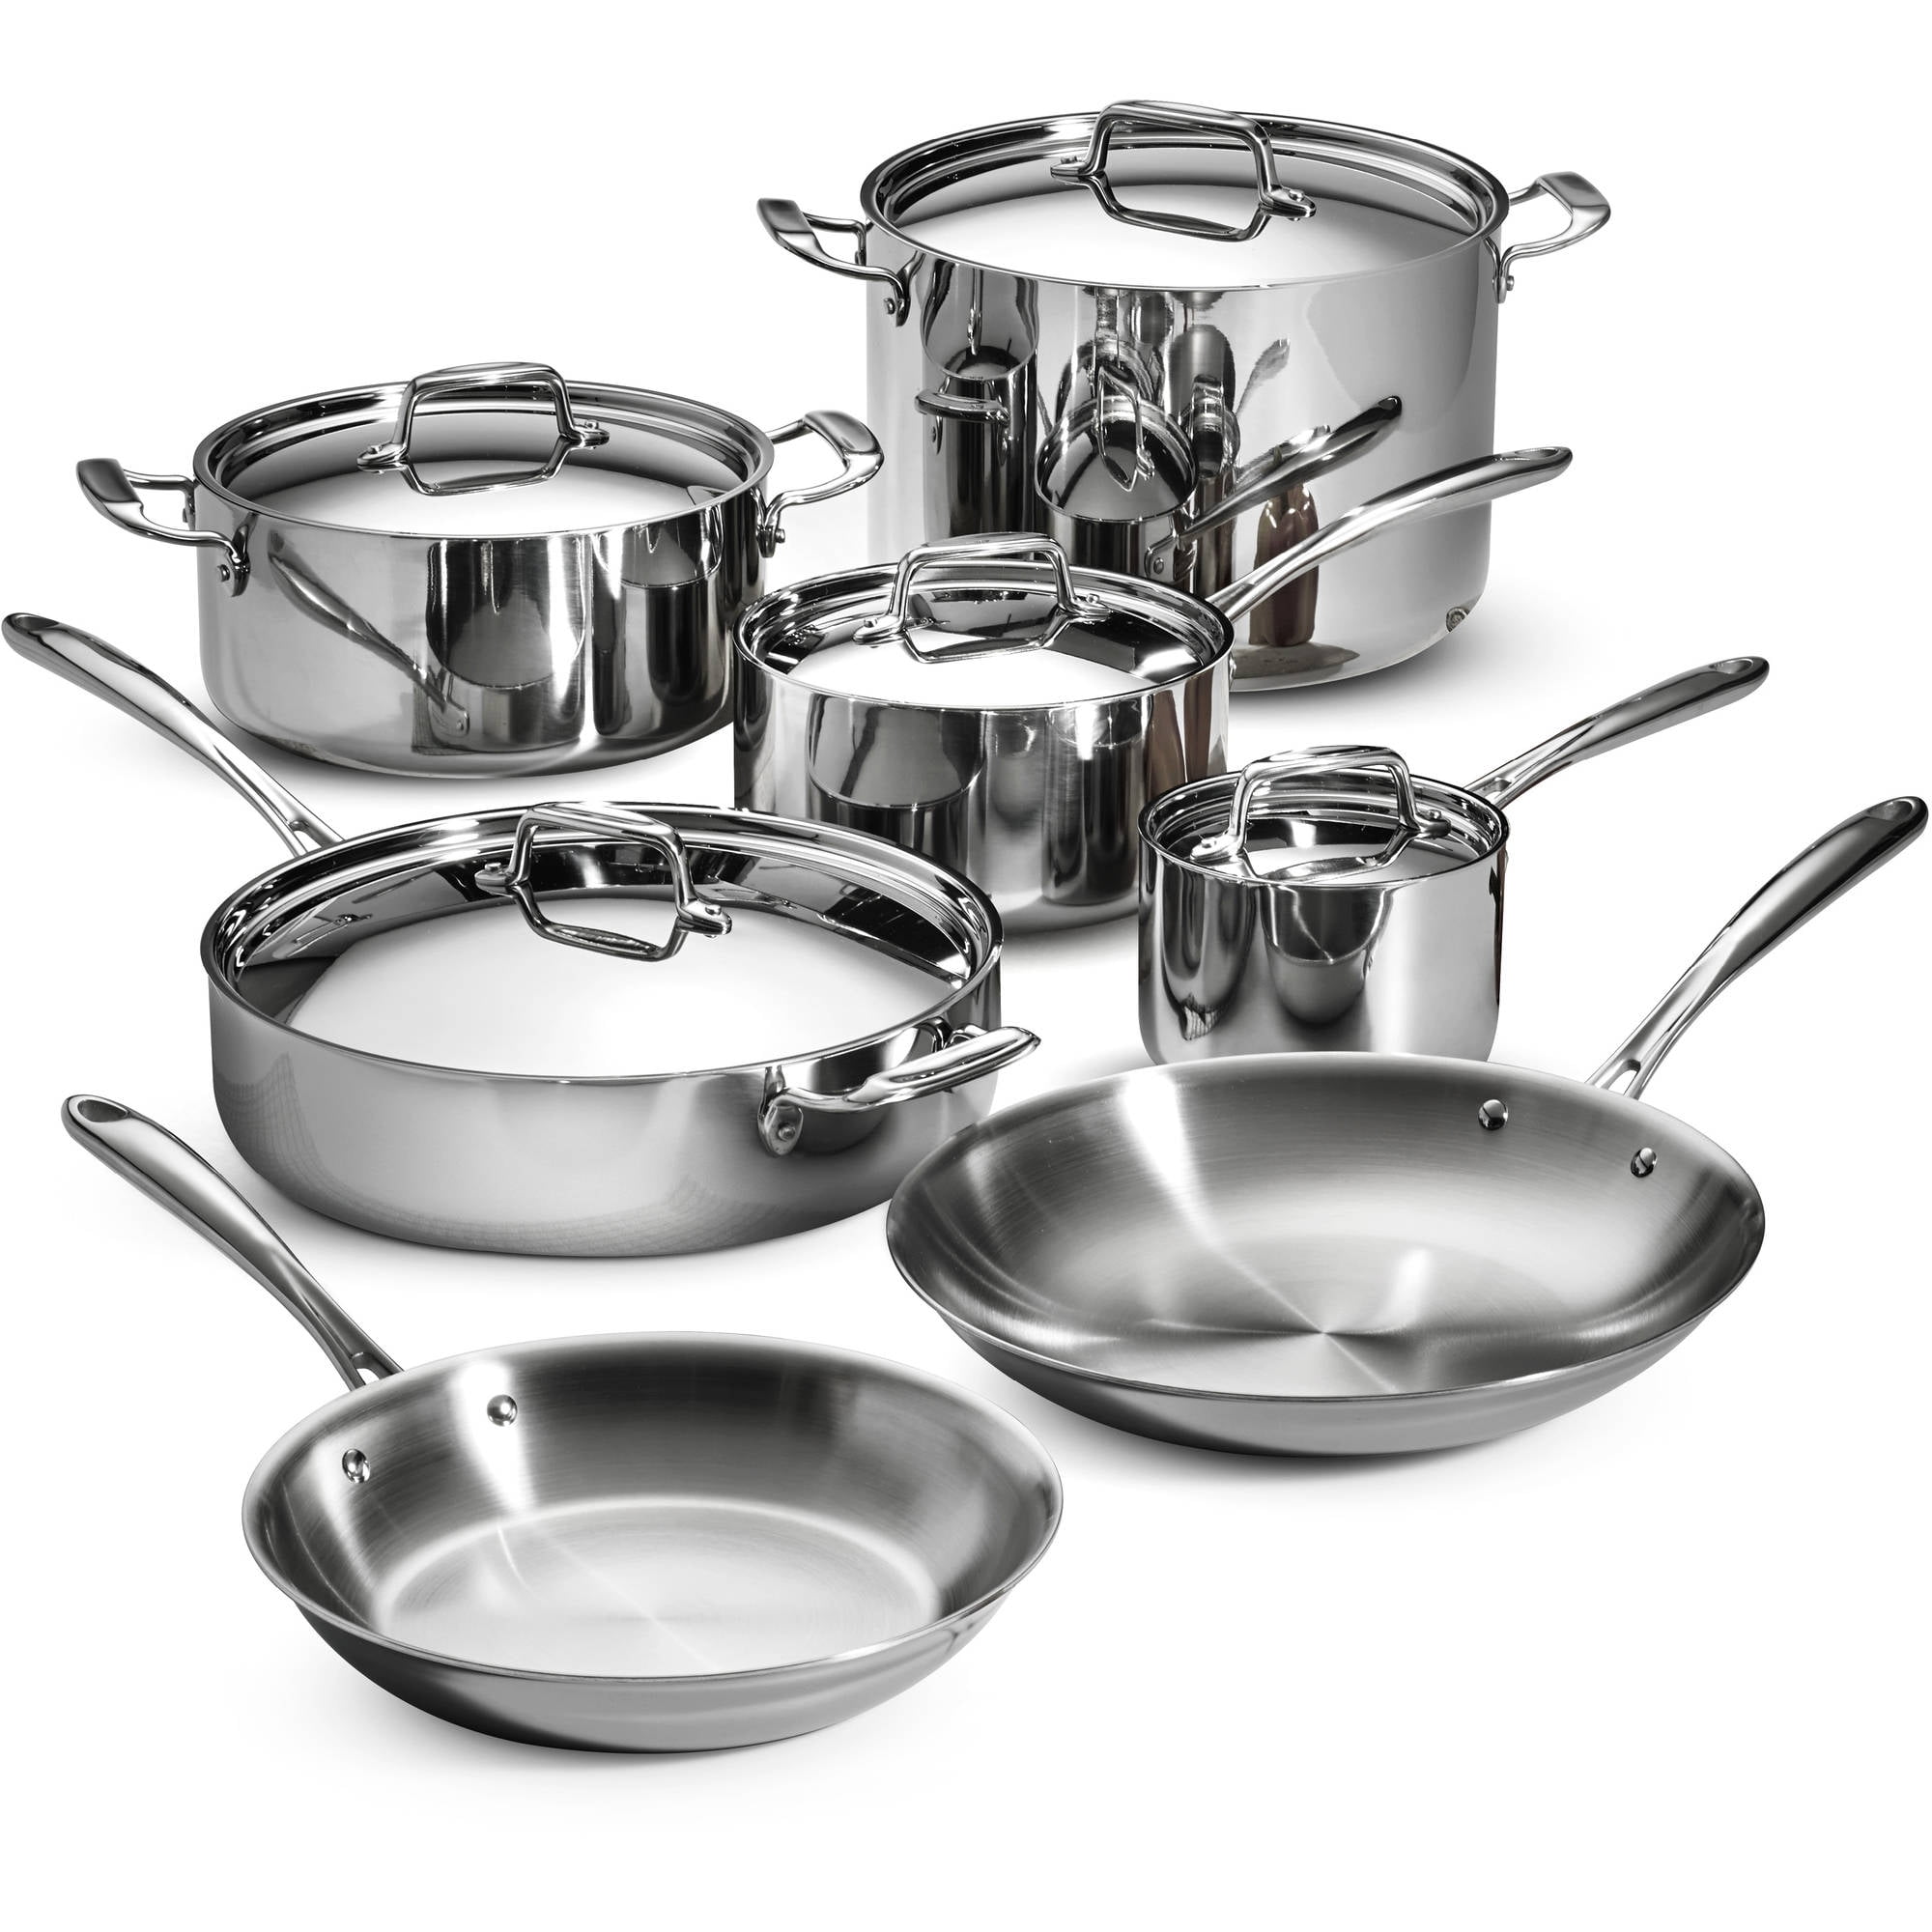 Tri Ply Clad Stainless Steel Cookware